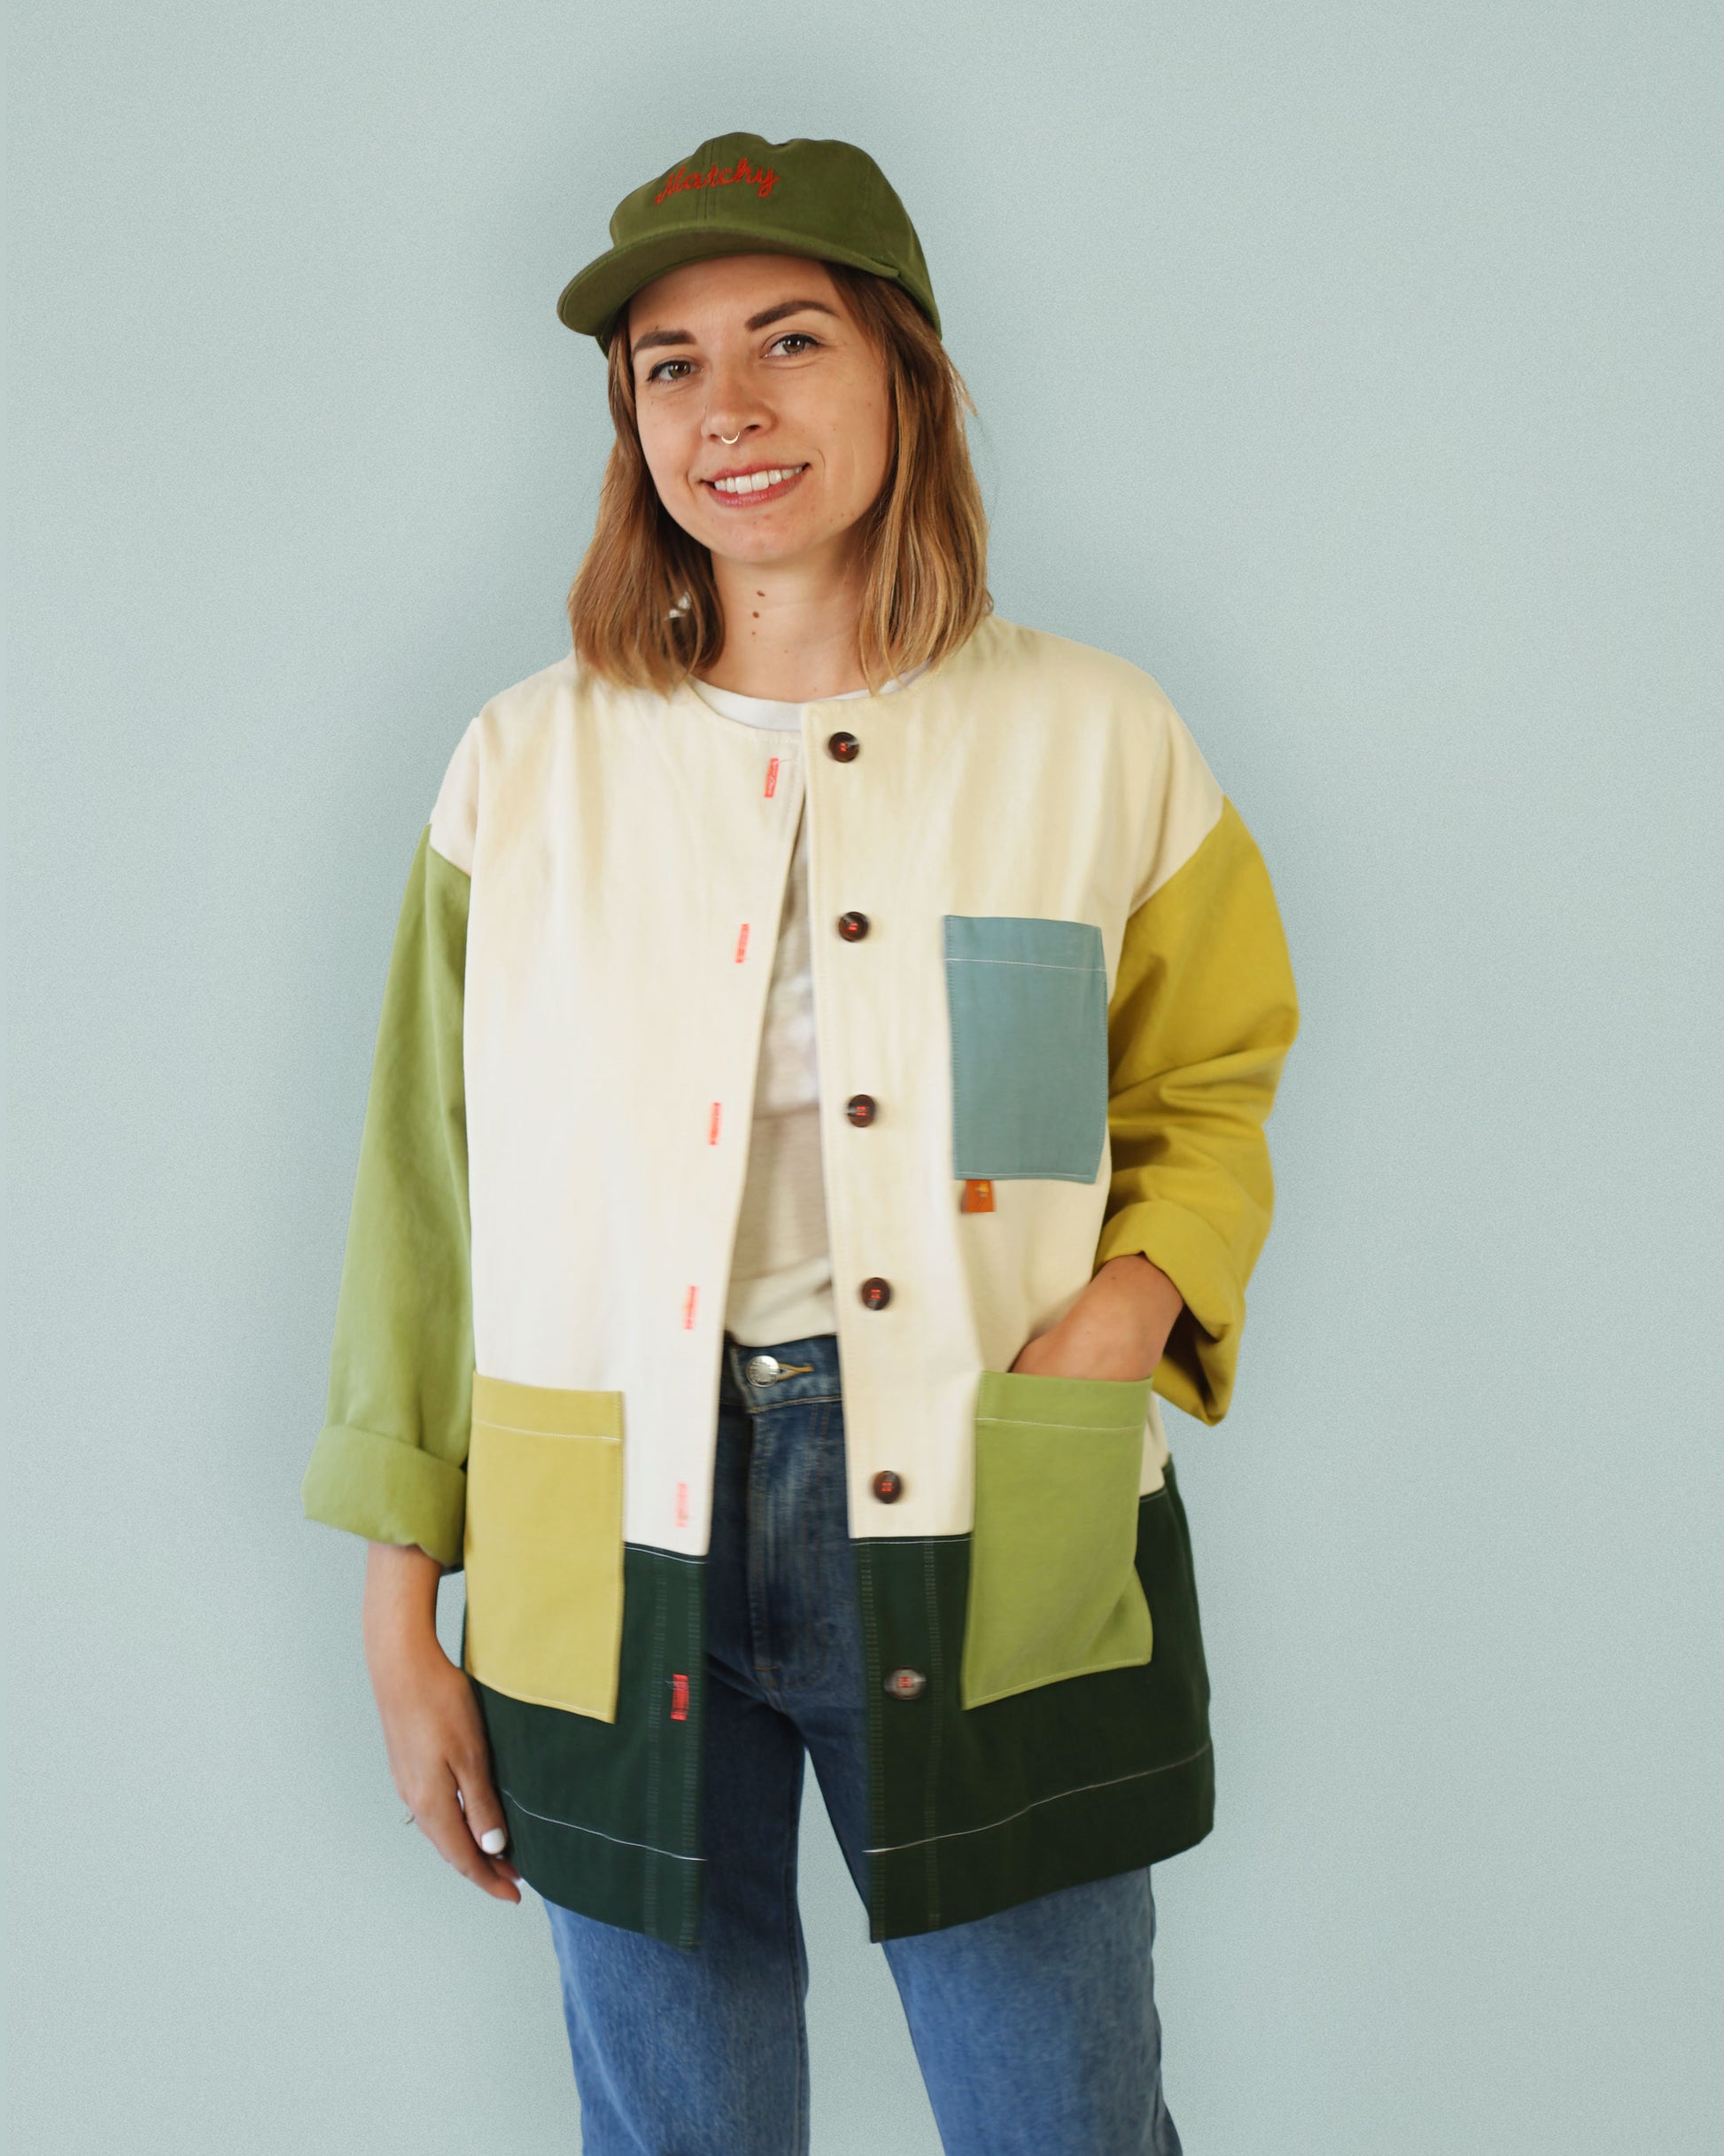 Cara Linen Blouse With Oversized Patch Pockets Tutorial and Free